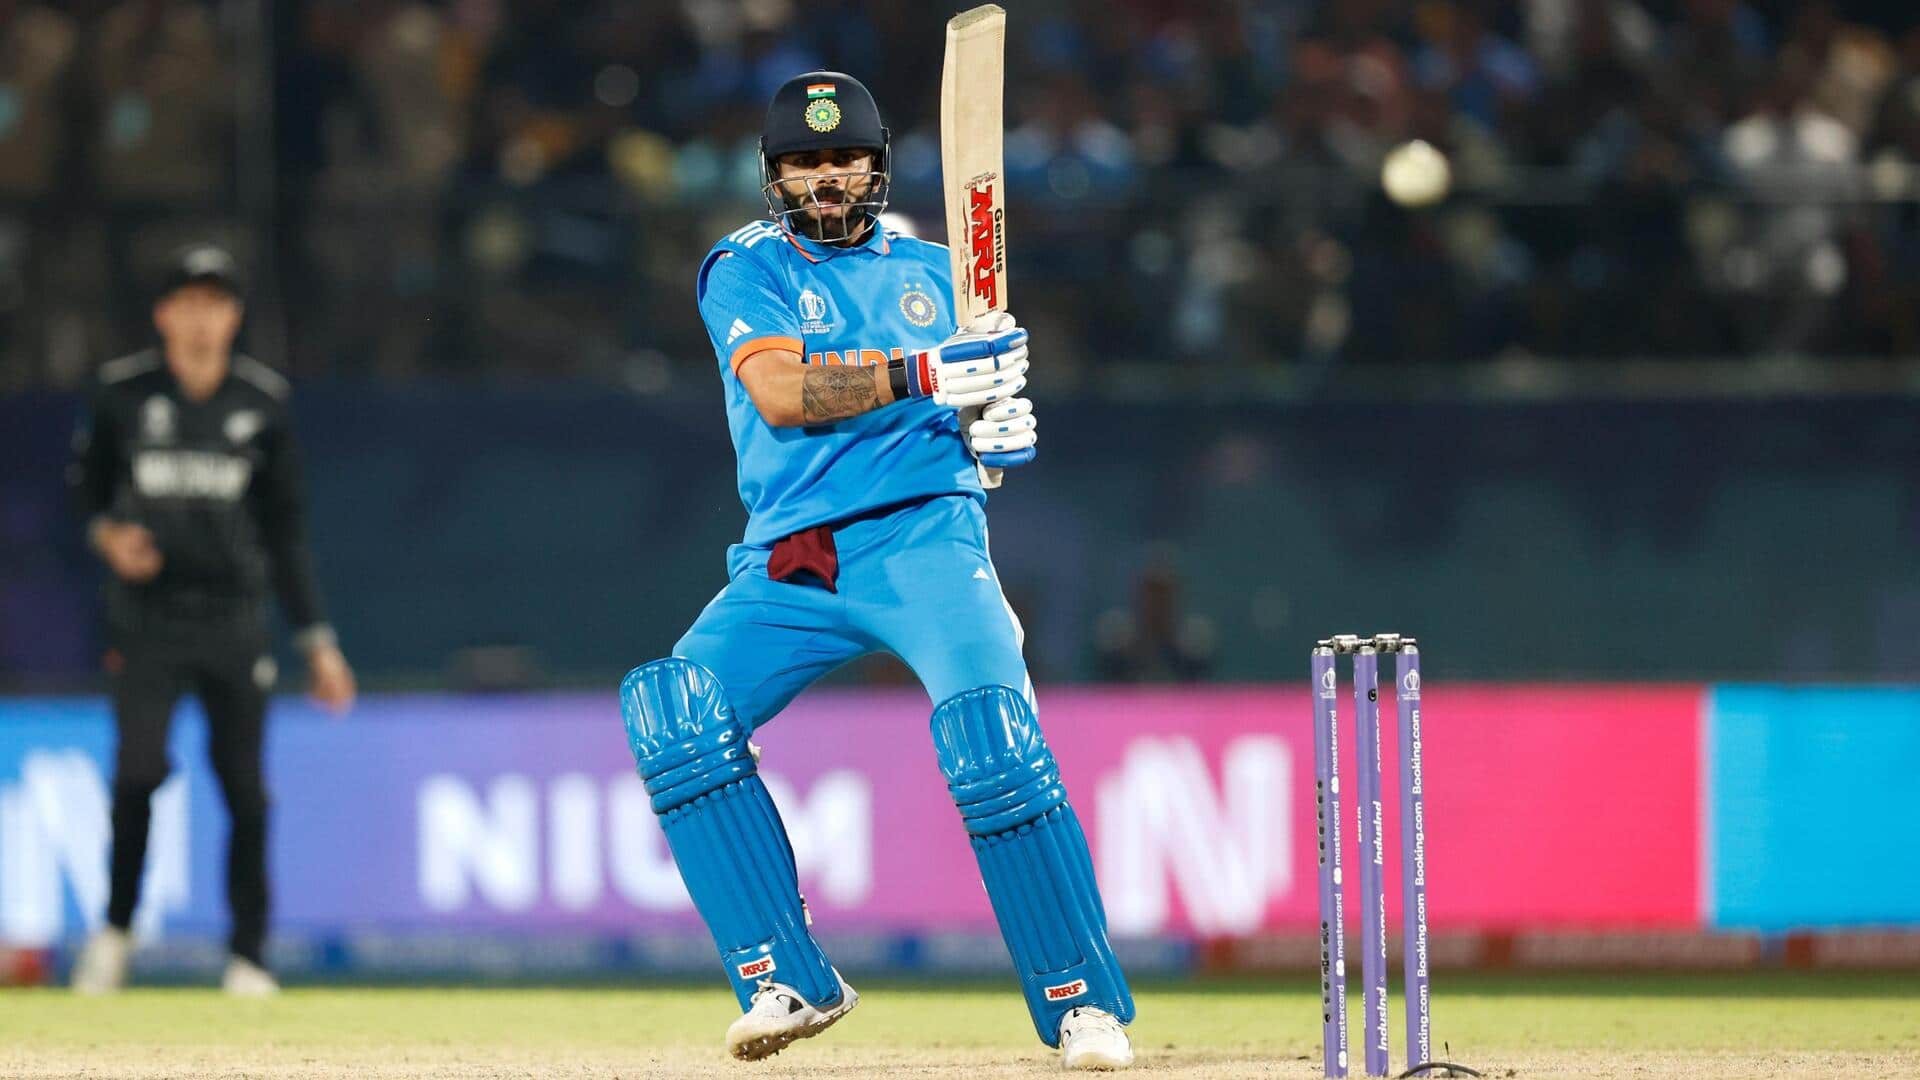 Here are lesser-known records of Virat Kohli in T20 cricket